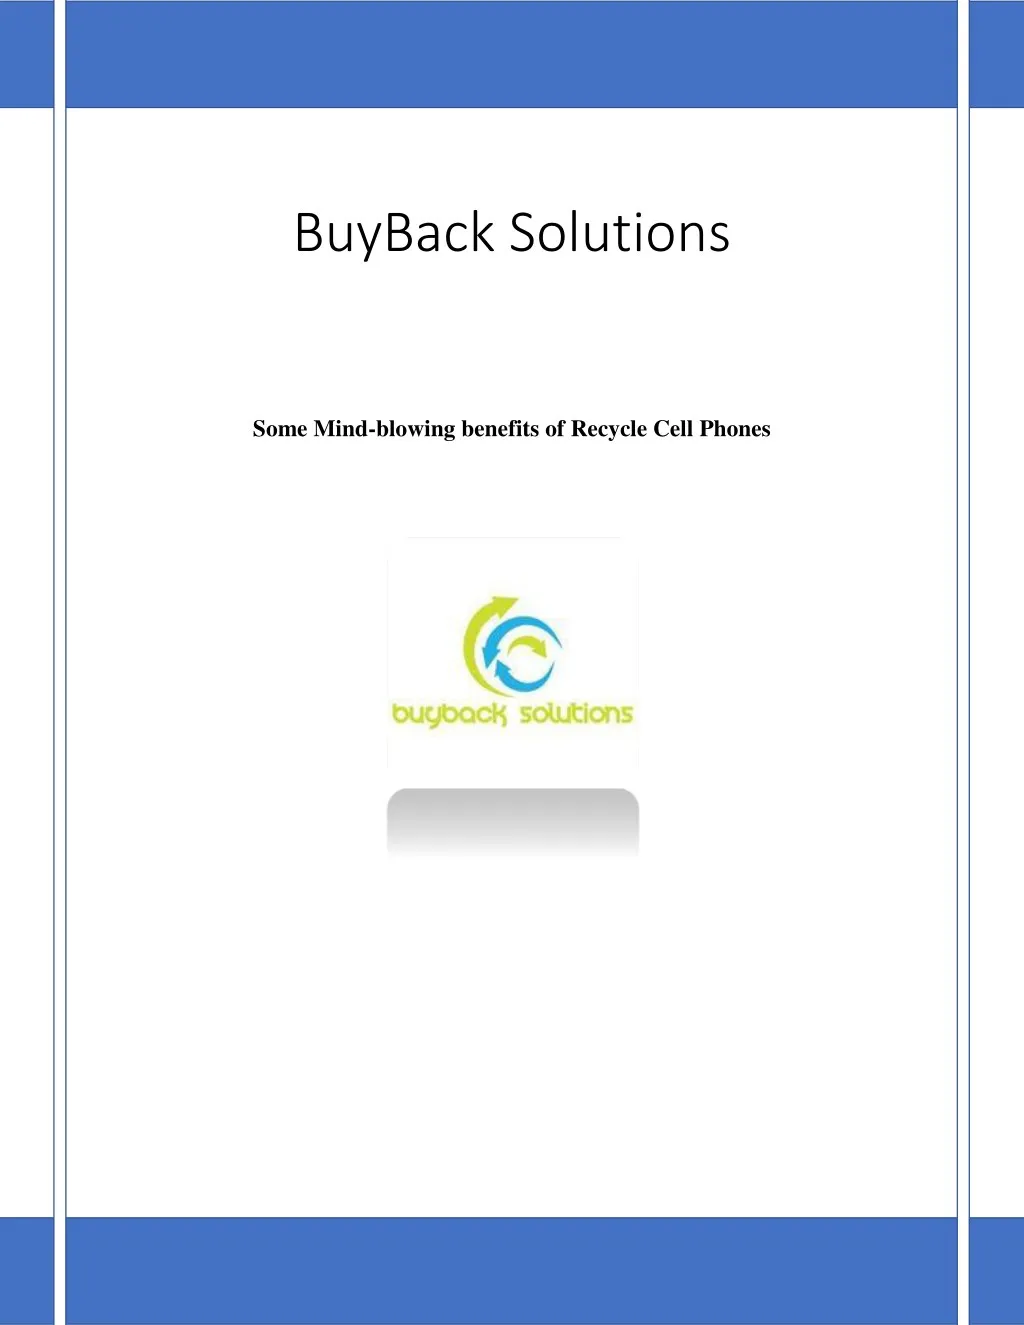 buyback solutions